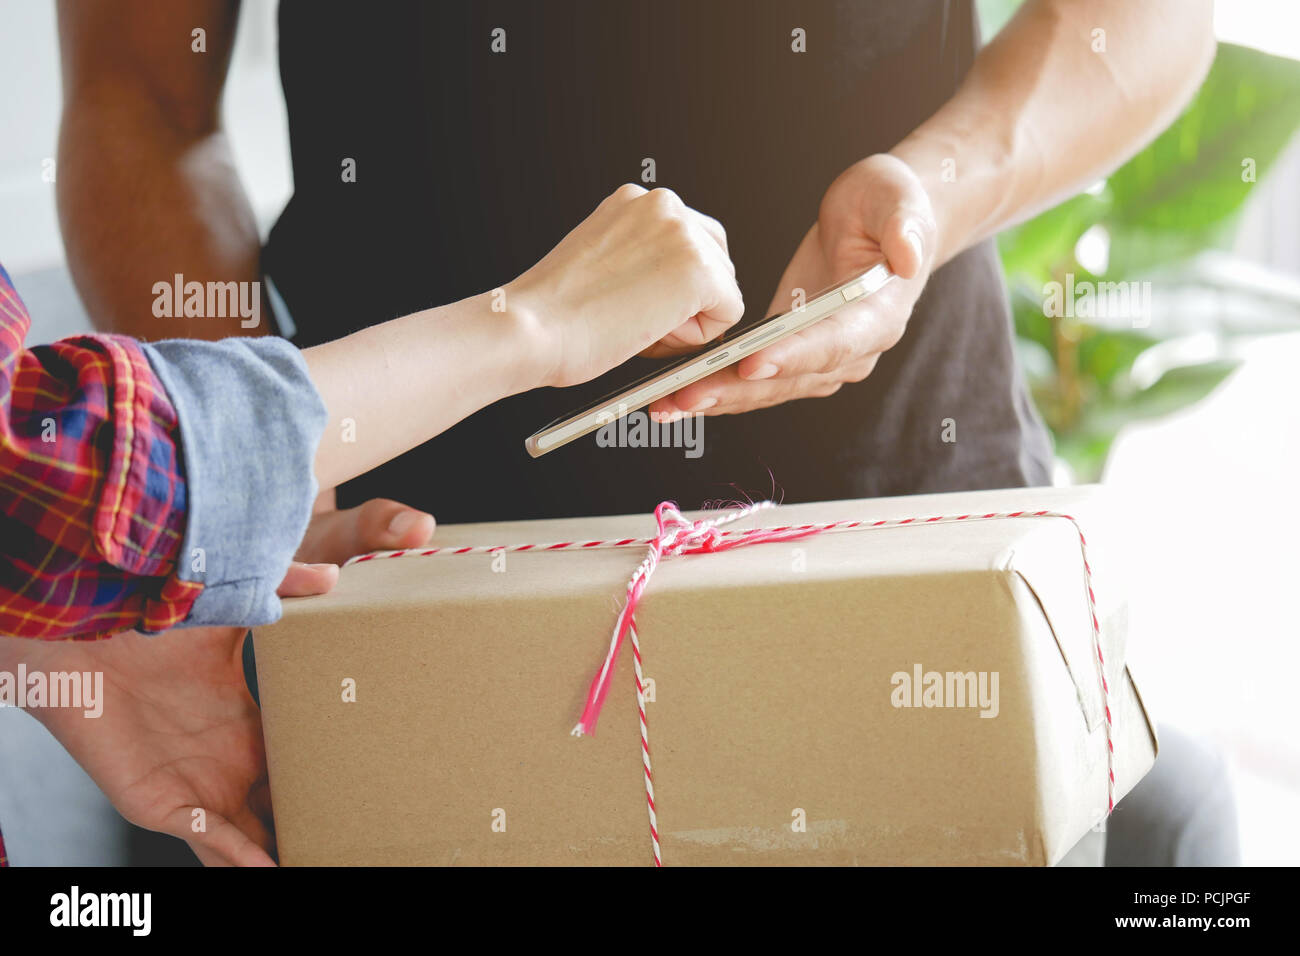 woman appending signature sign on smartphone after receive boxes from delivery man shopping Stock Photo